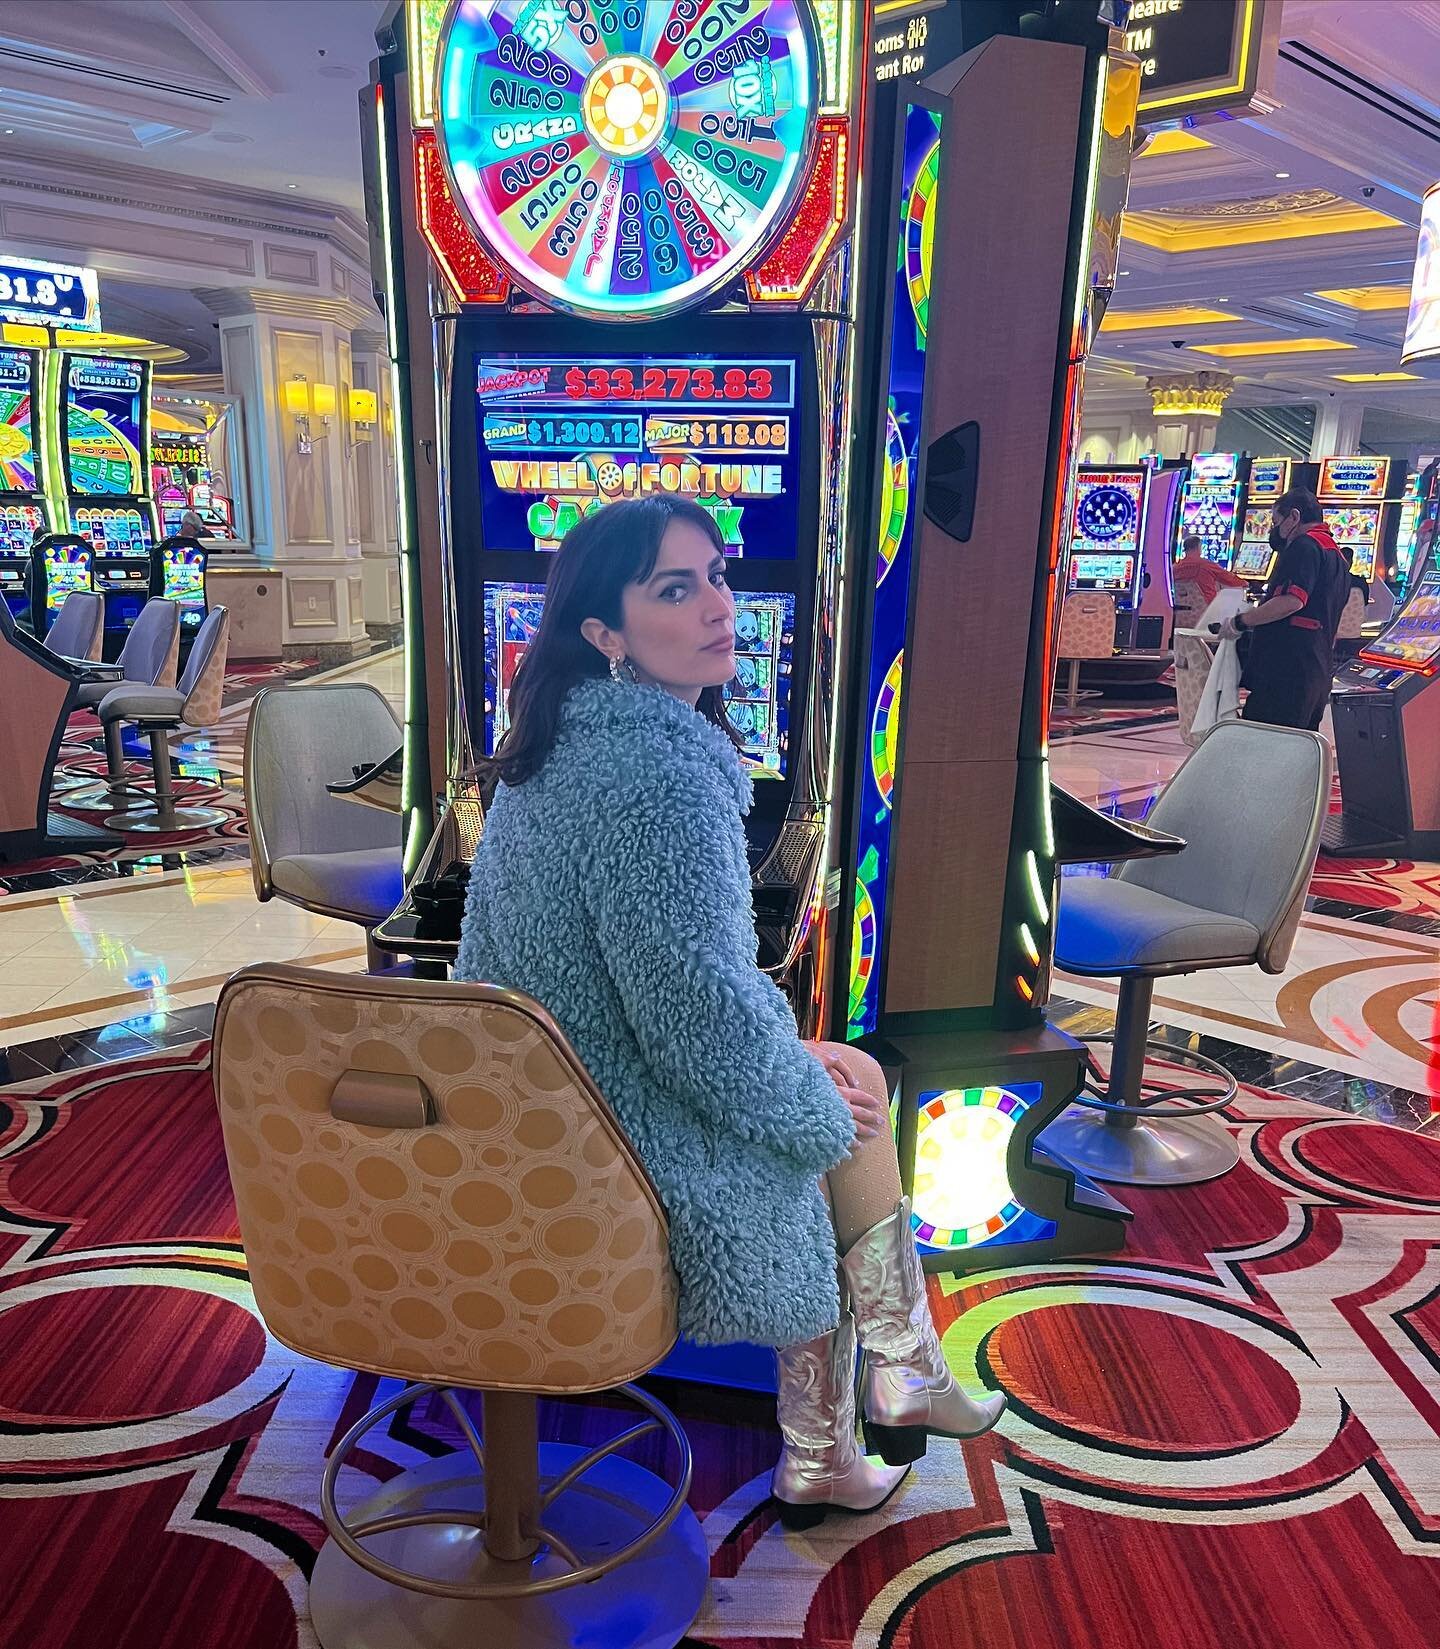 Serious core memories were made during my first (and maybe last?) trip to Las Vegas. Scroll if you want to see a video of me absolutely scream crying.